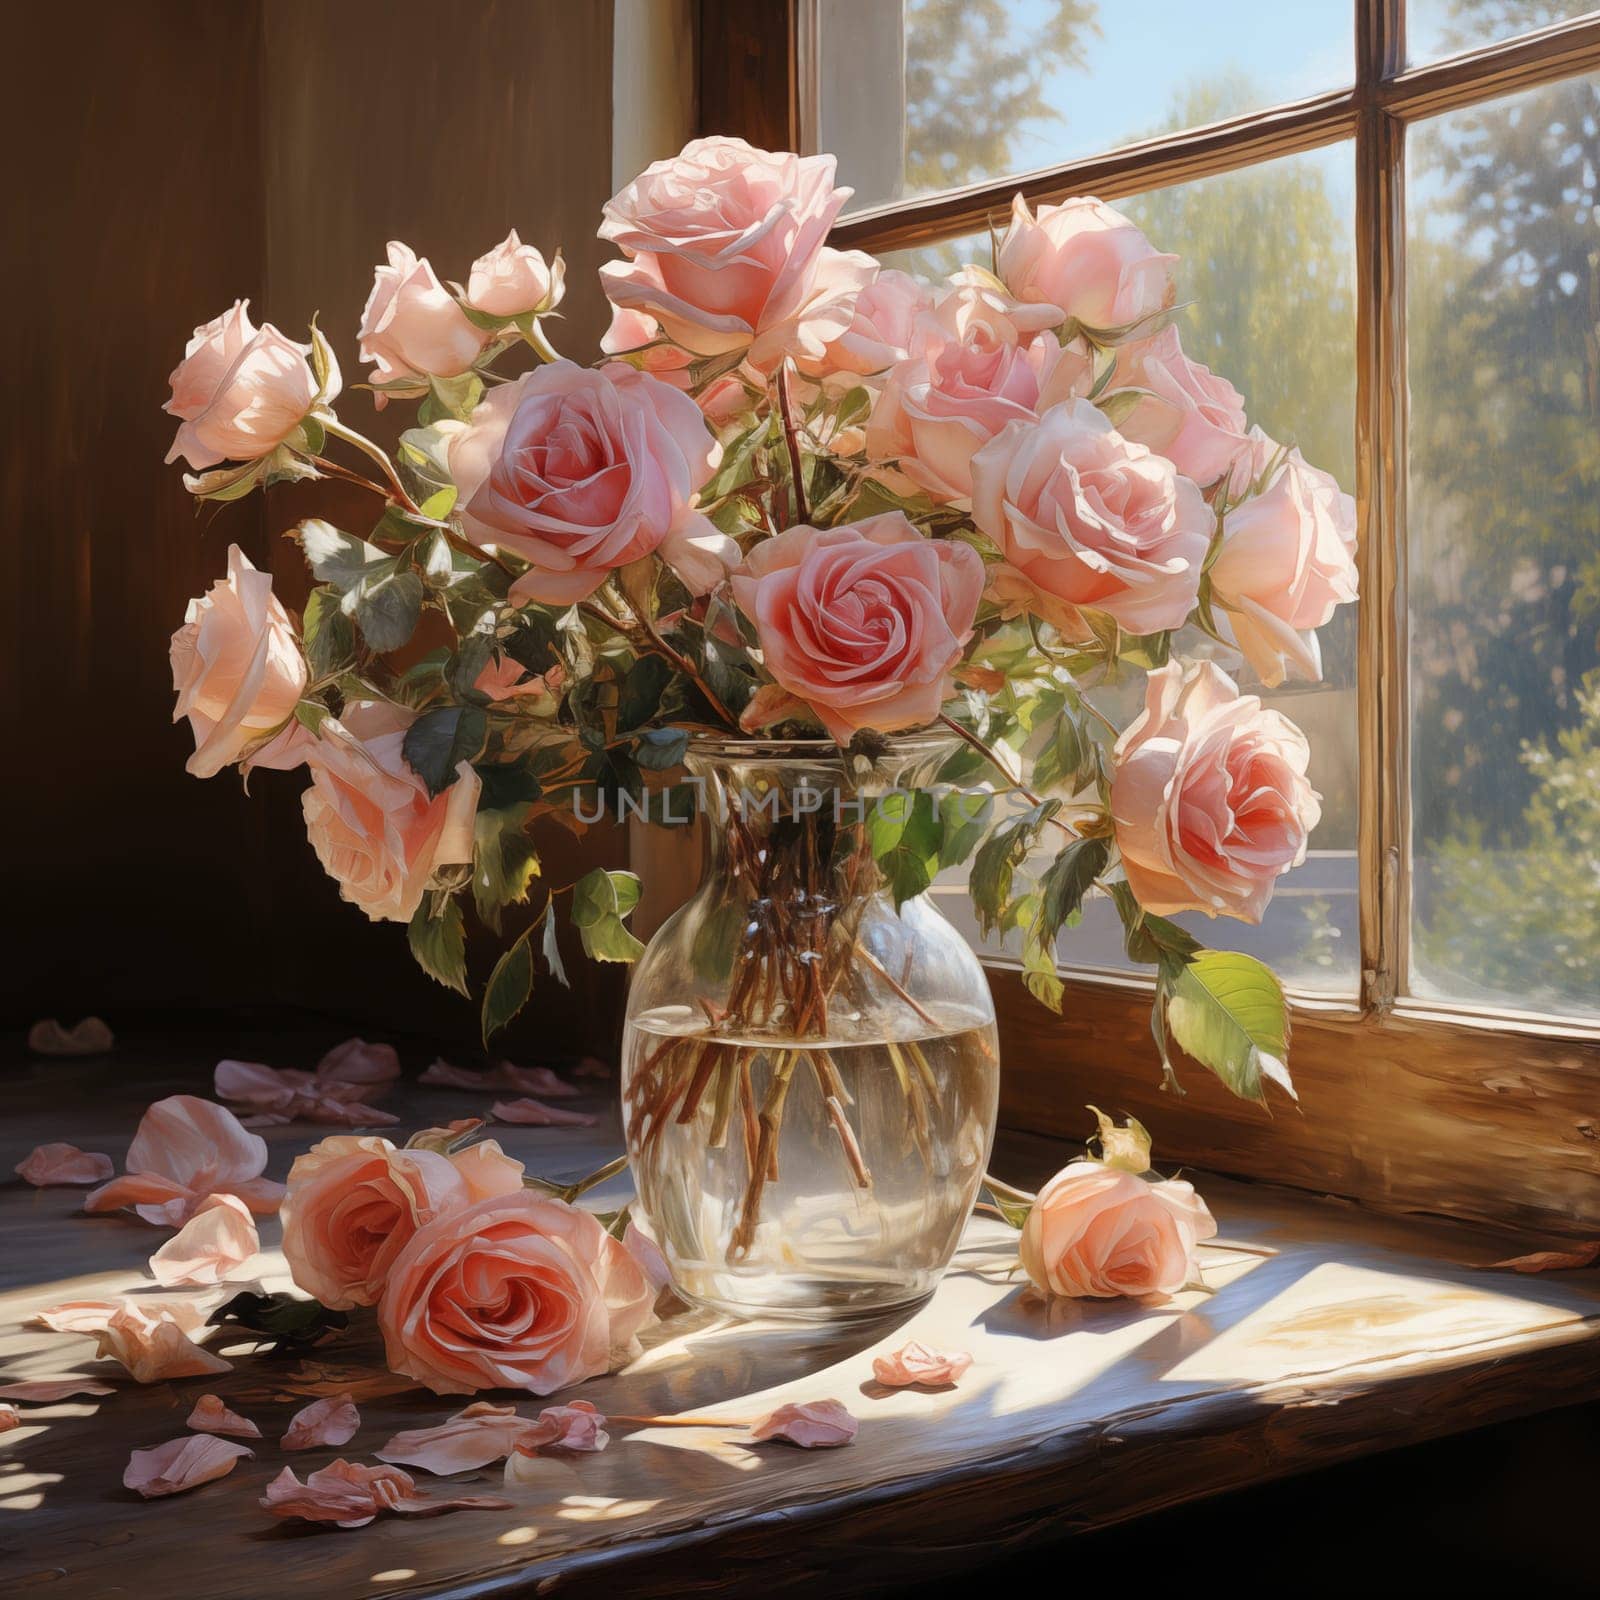 A bouquet of pink roses in a glass vase on a table near the window. by AnatoliiFoto